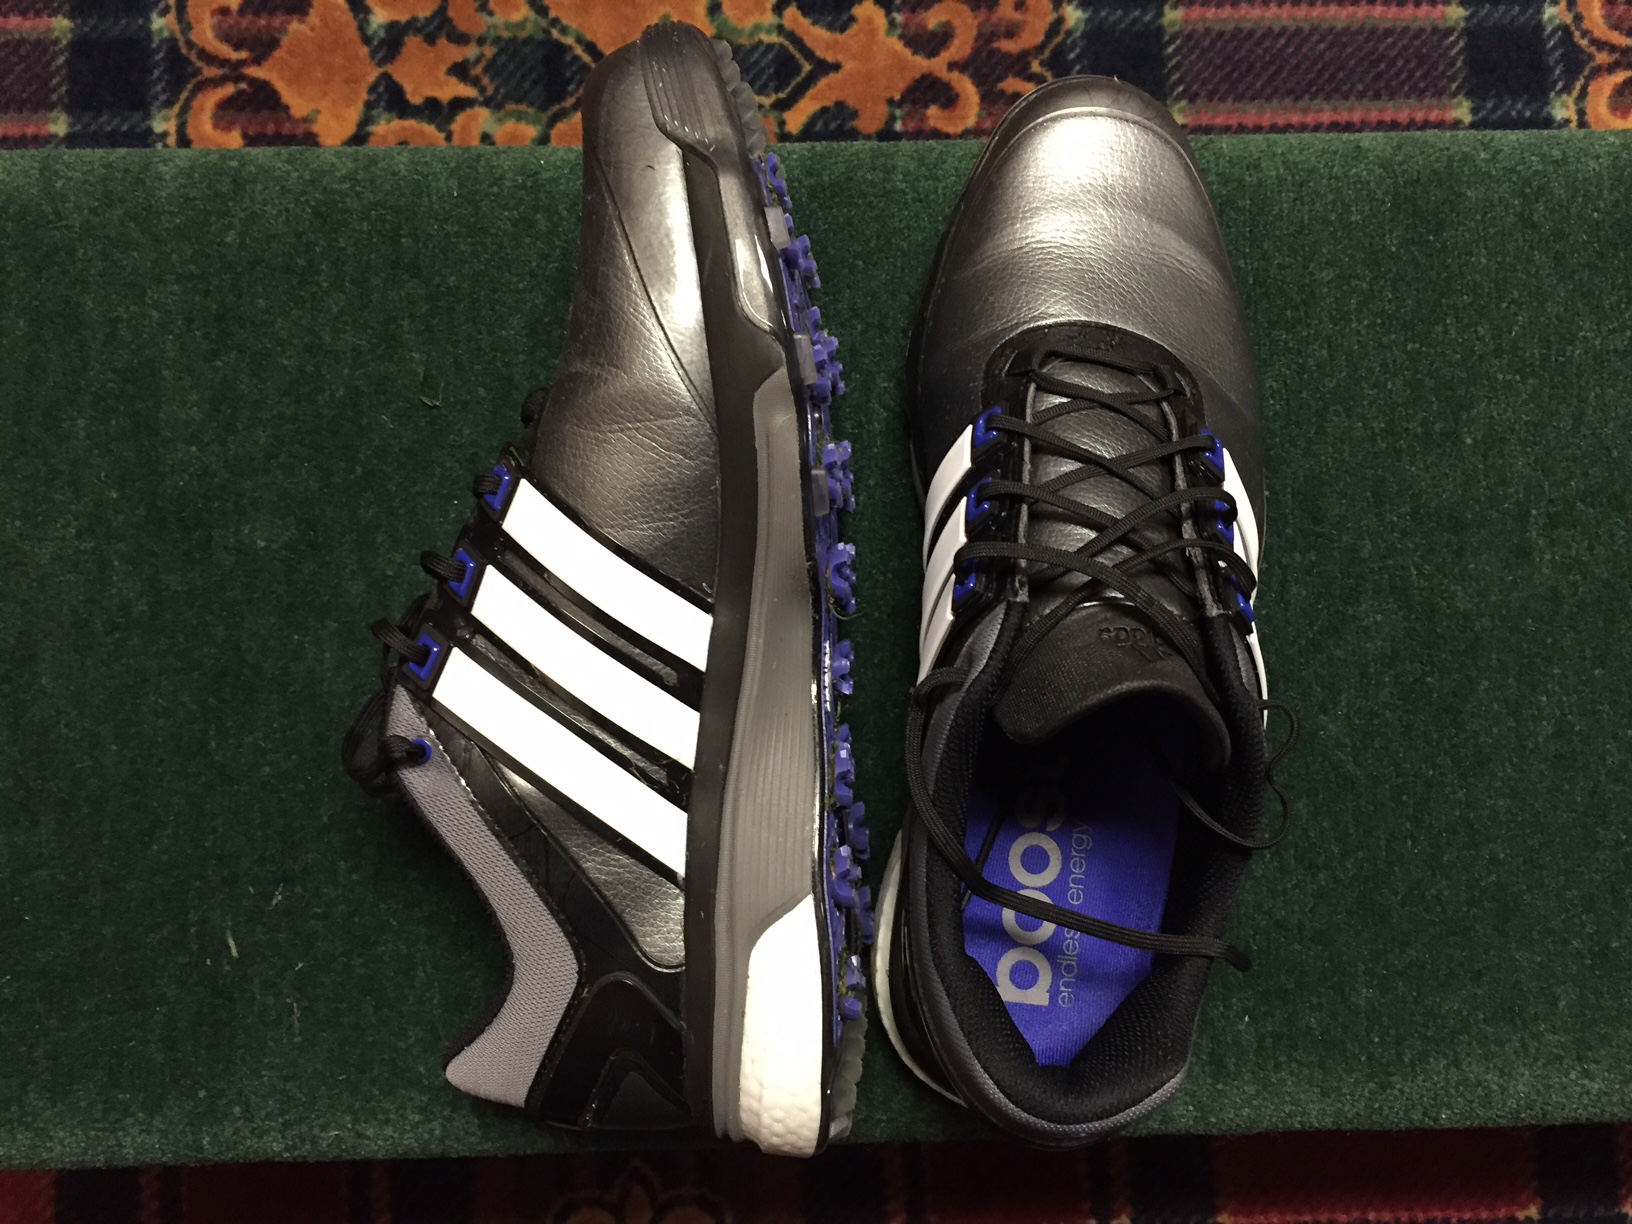 Adidas Adipower Boost Golf Shoe Review -